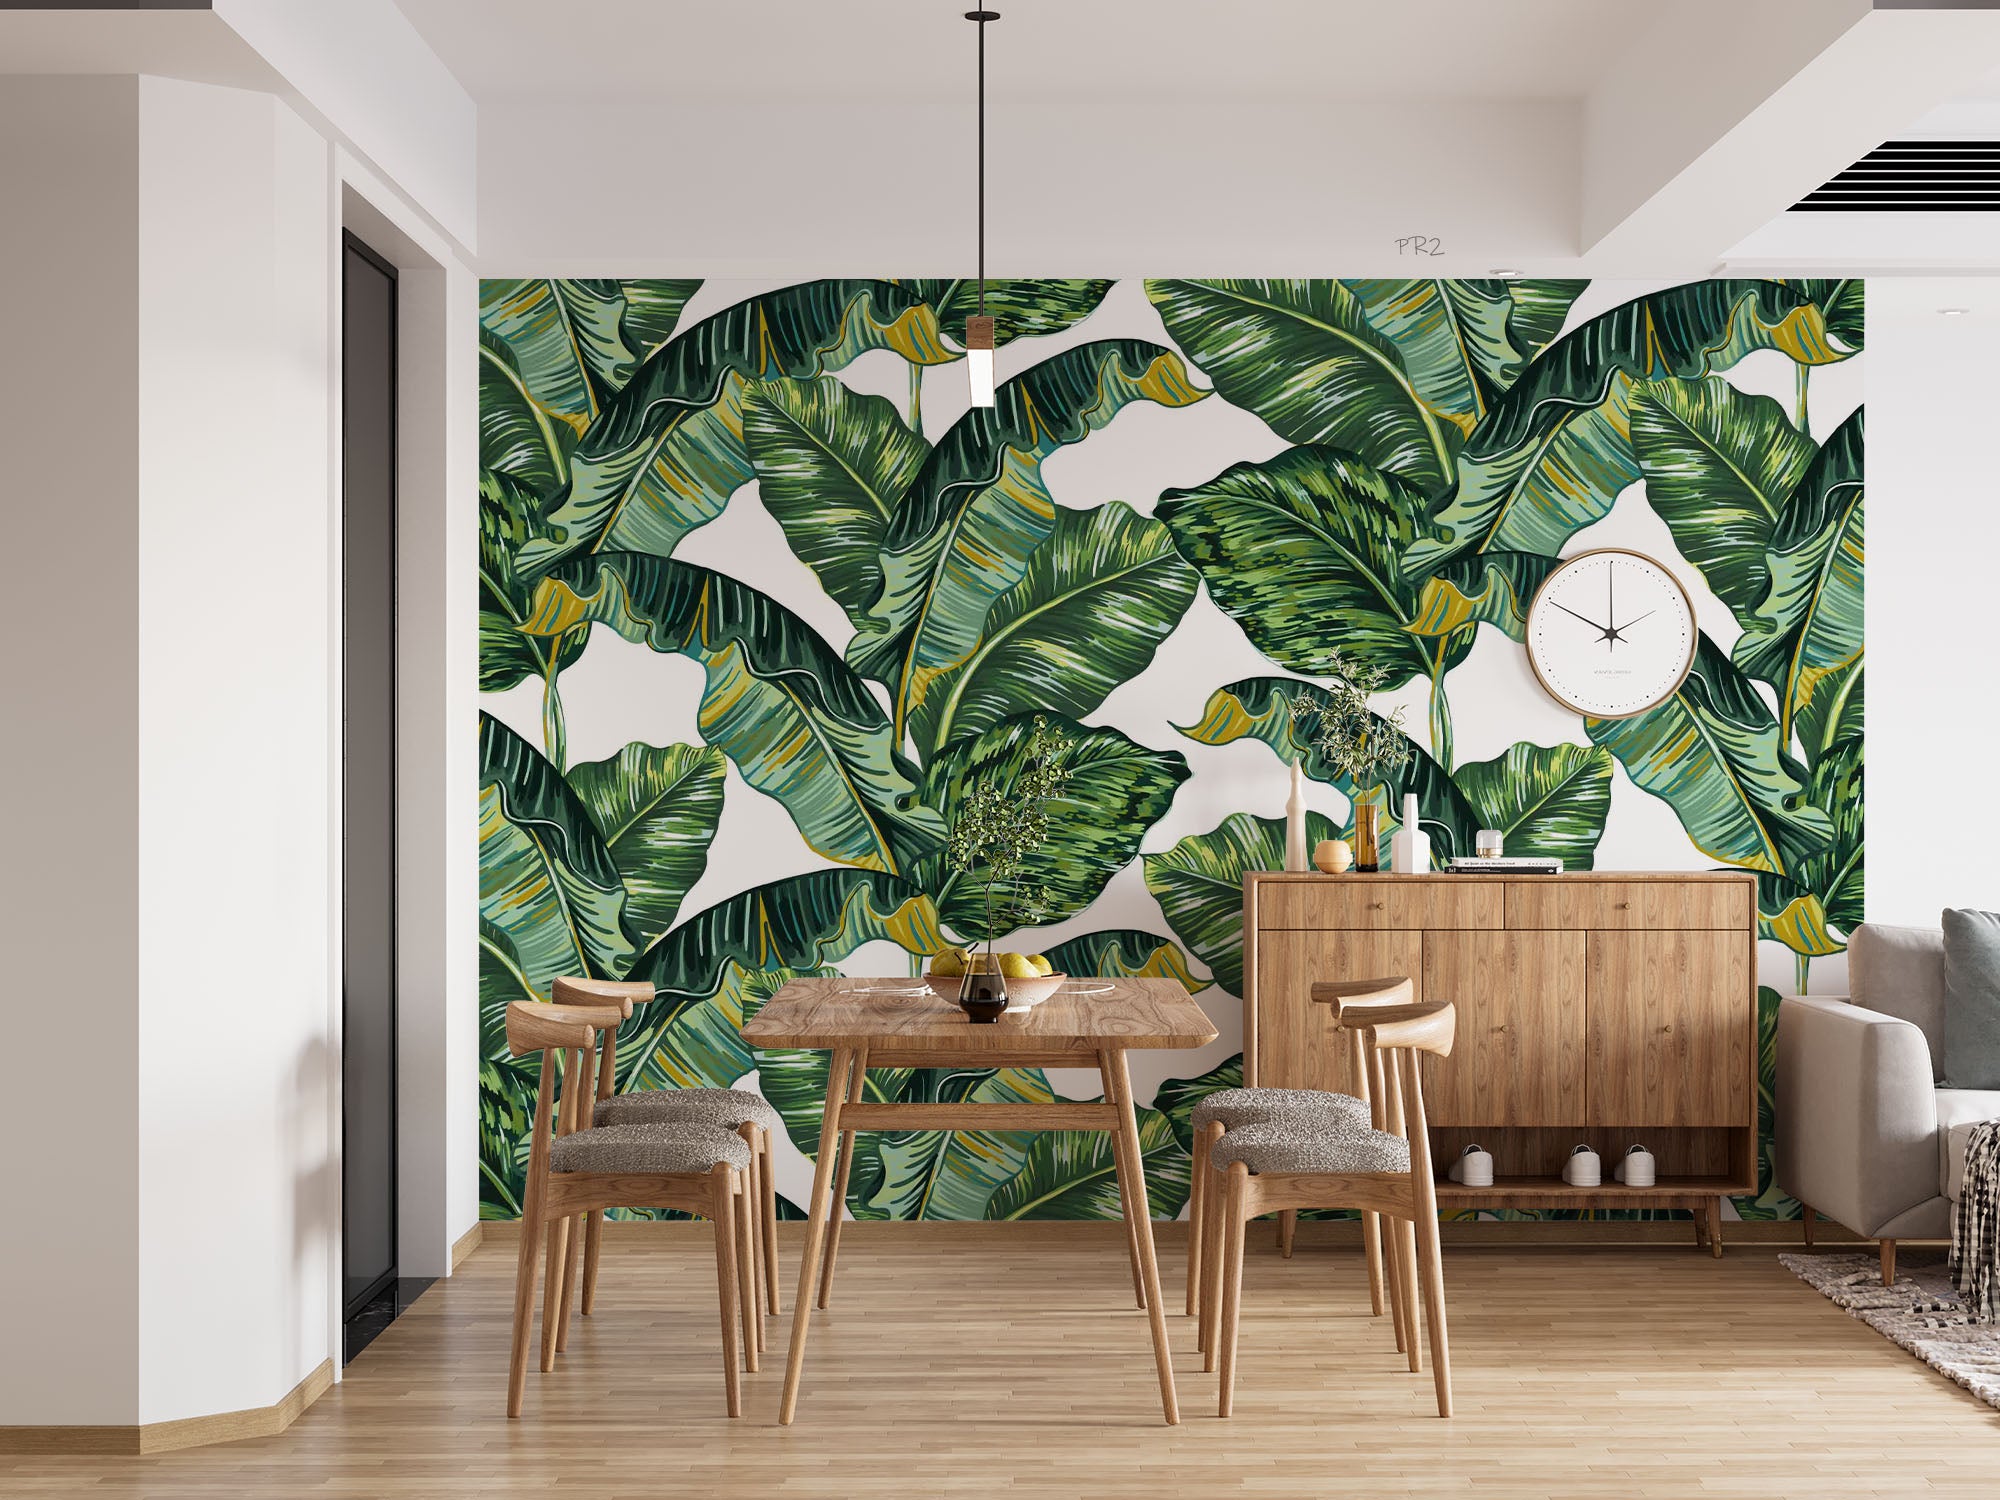 3D Vintage Tropical Green Plantain Leaves Wall Mural Wallpaper GD 3694- Jess Art Decoration